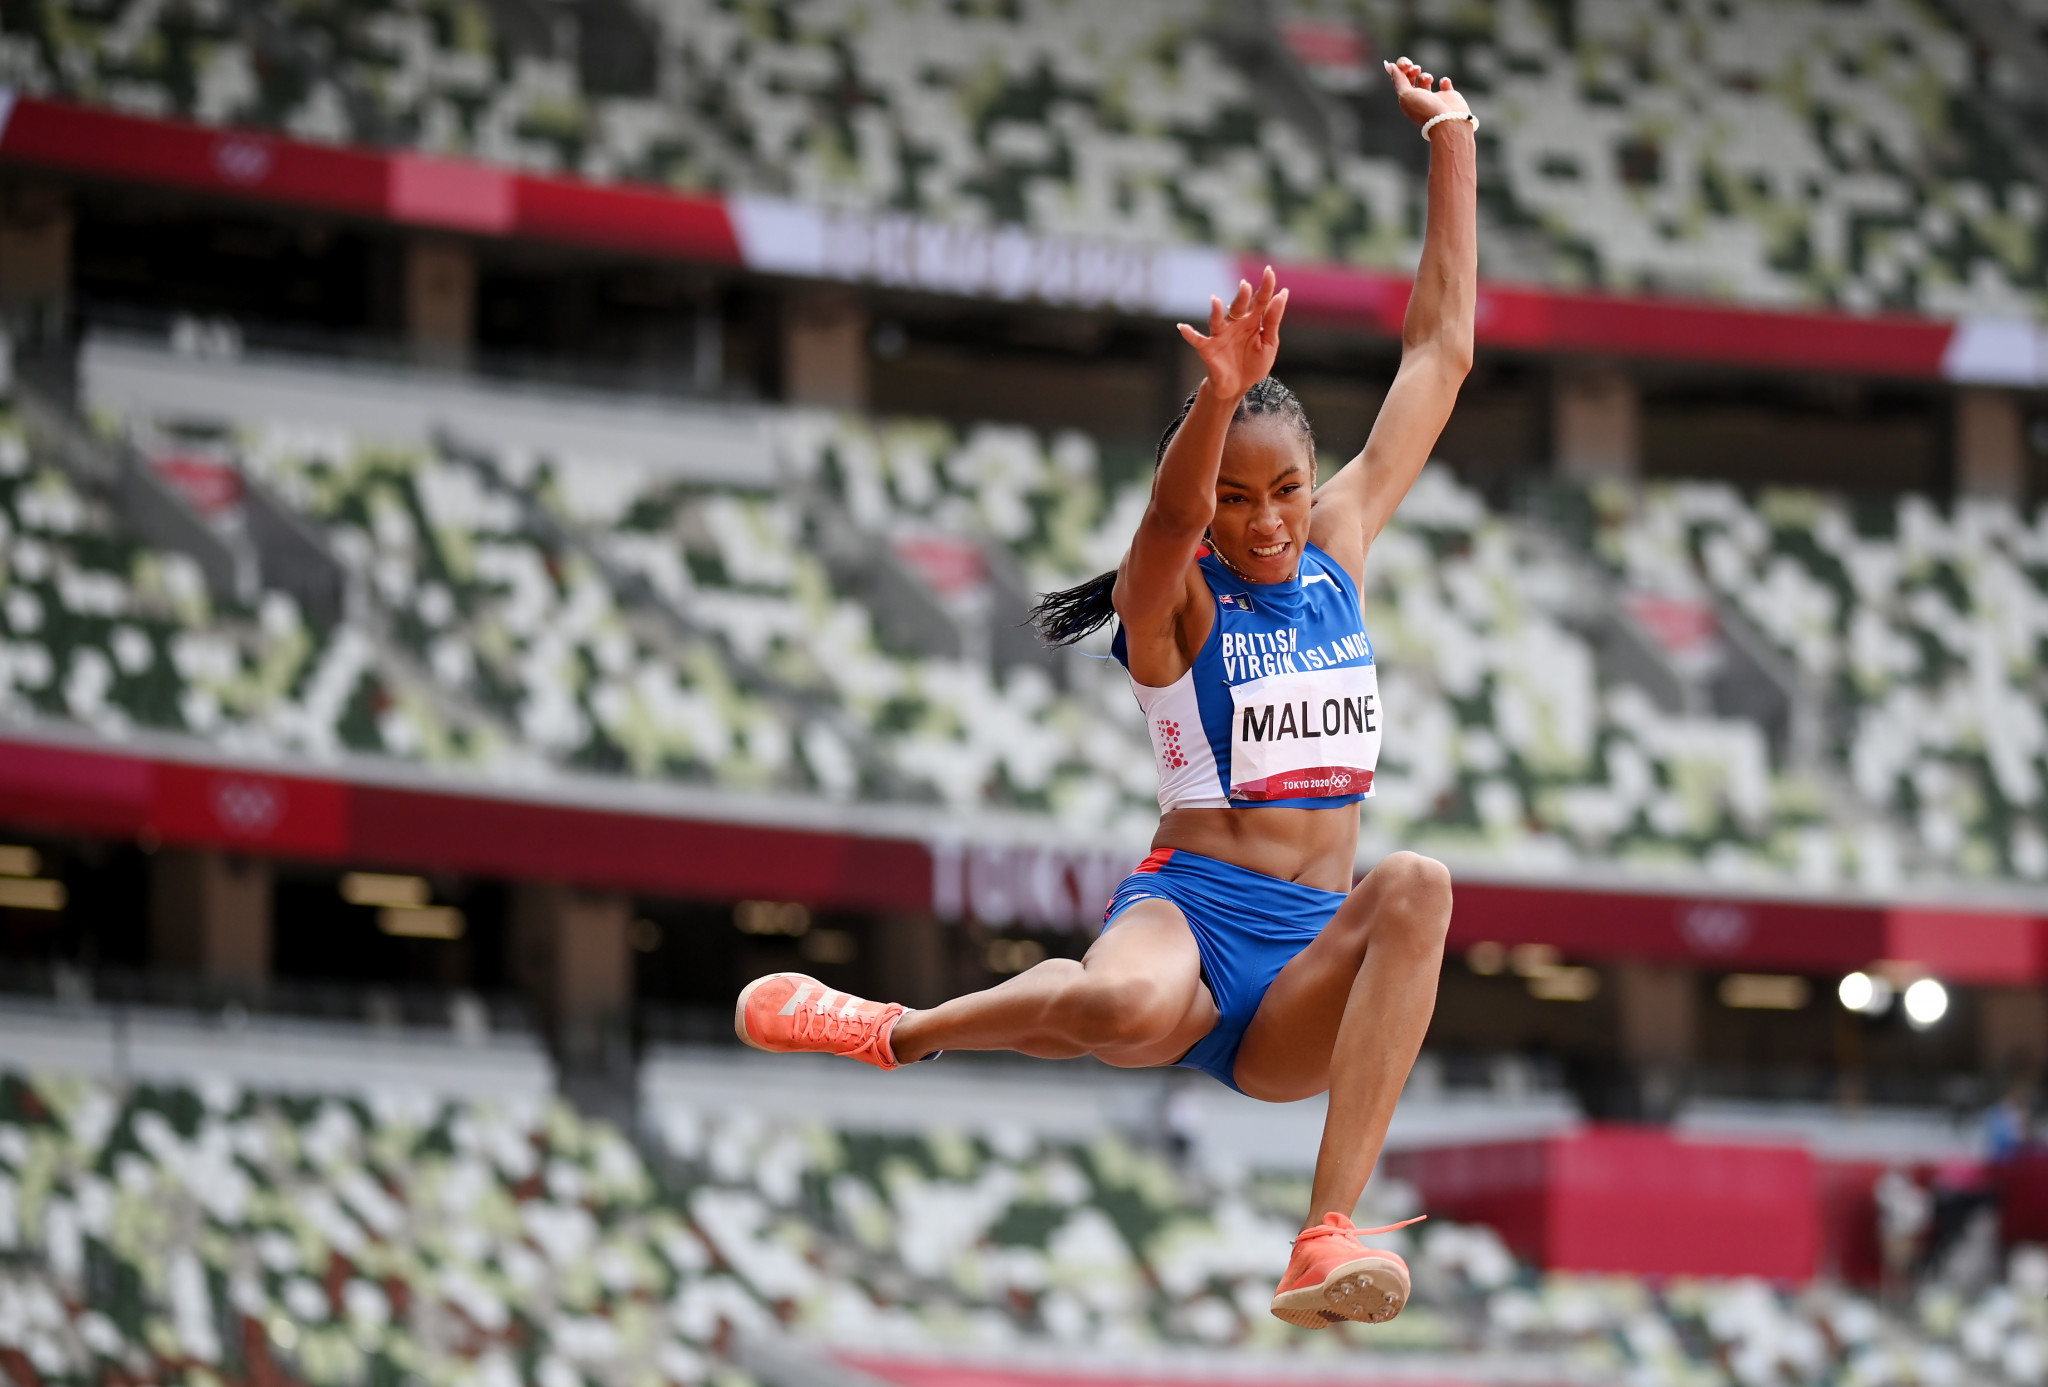 Chantel Malone wants to compete at the 2022 Commonwealth Games and World Athletics Championships despite a short turnaround ©Getty Images